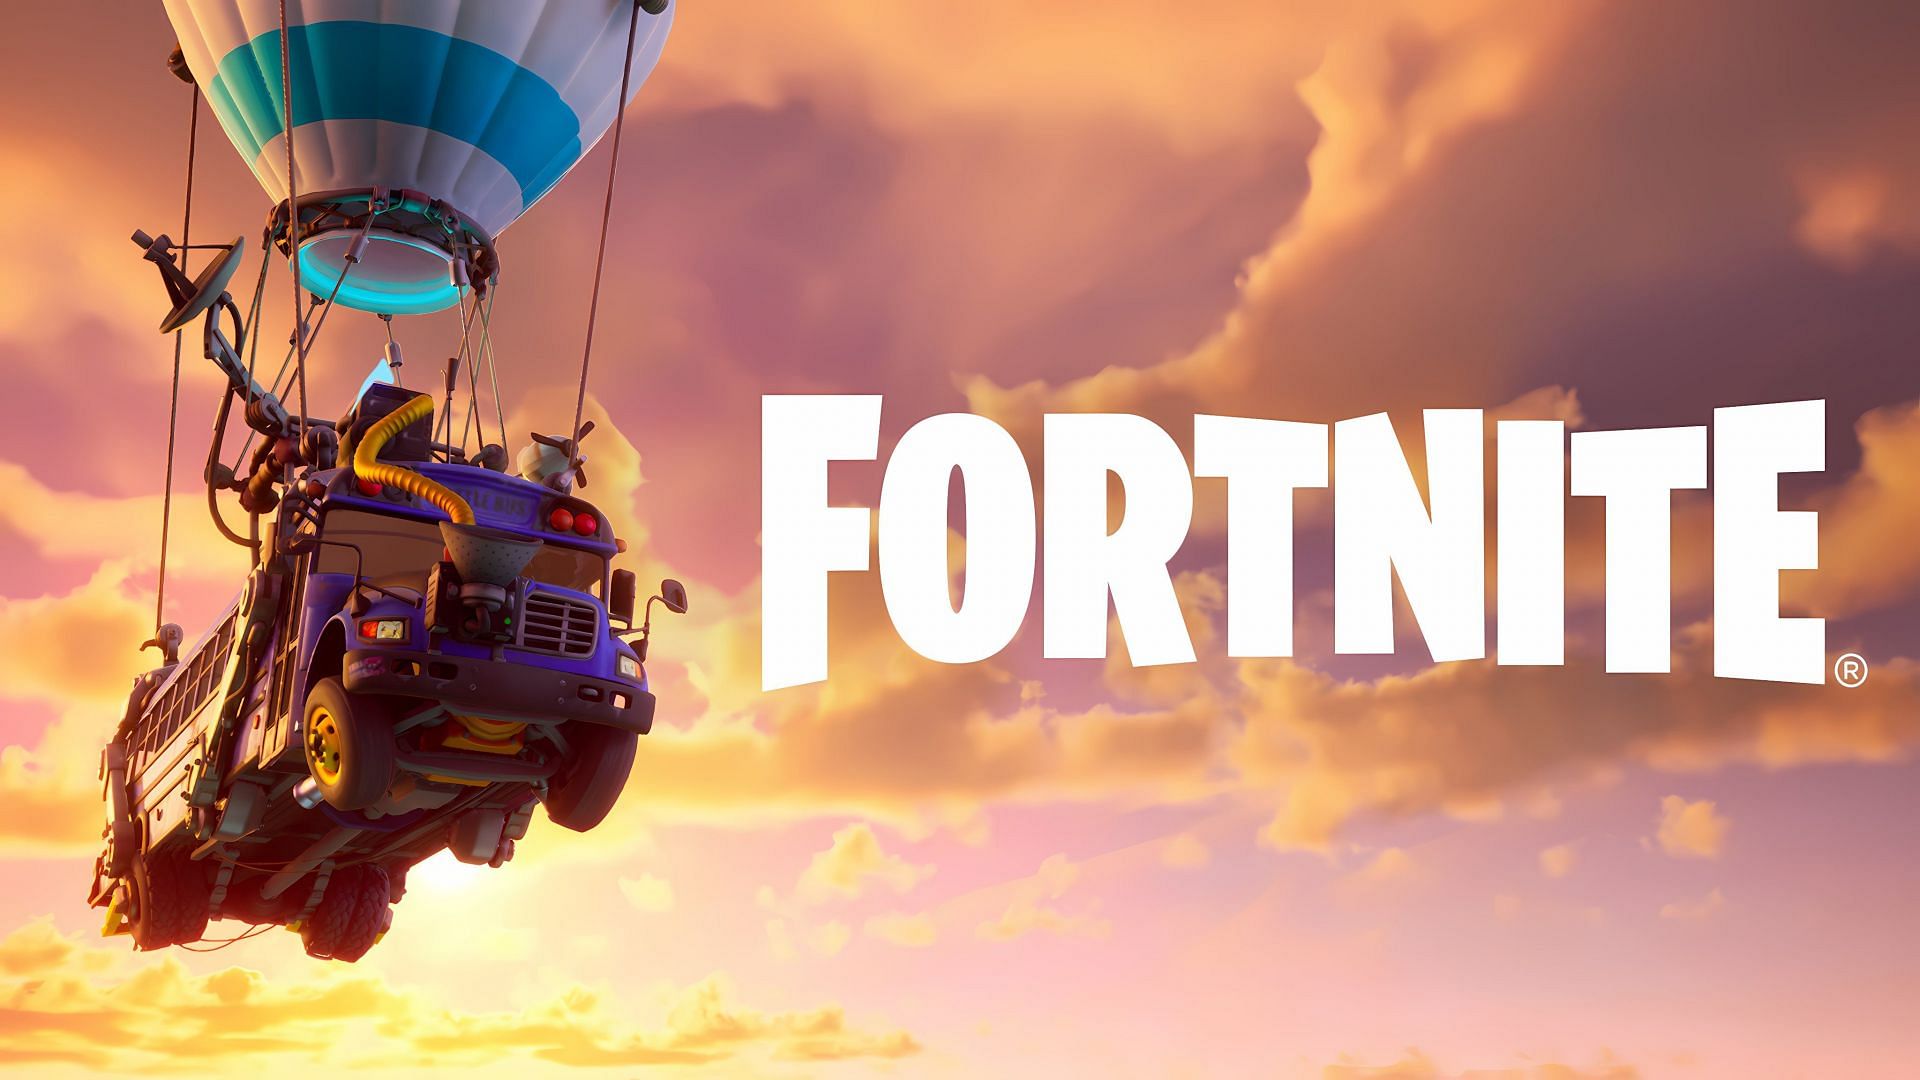 The setting sun, the yellow hues, and a new beginning in Fortnite Chapter 3 Season 3 (Image via Epic Games/Fortnite)